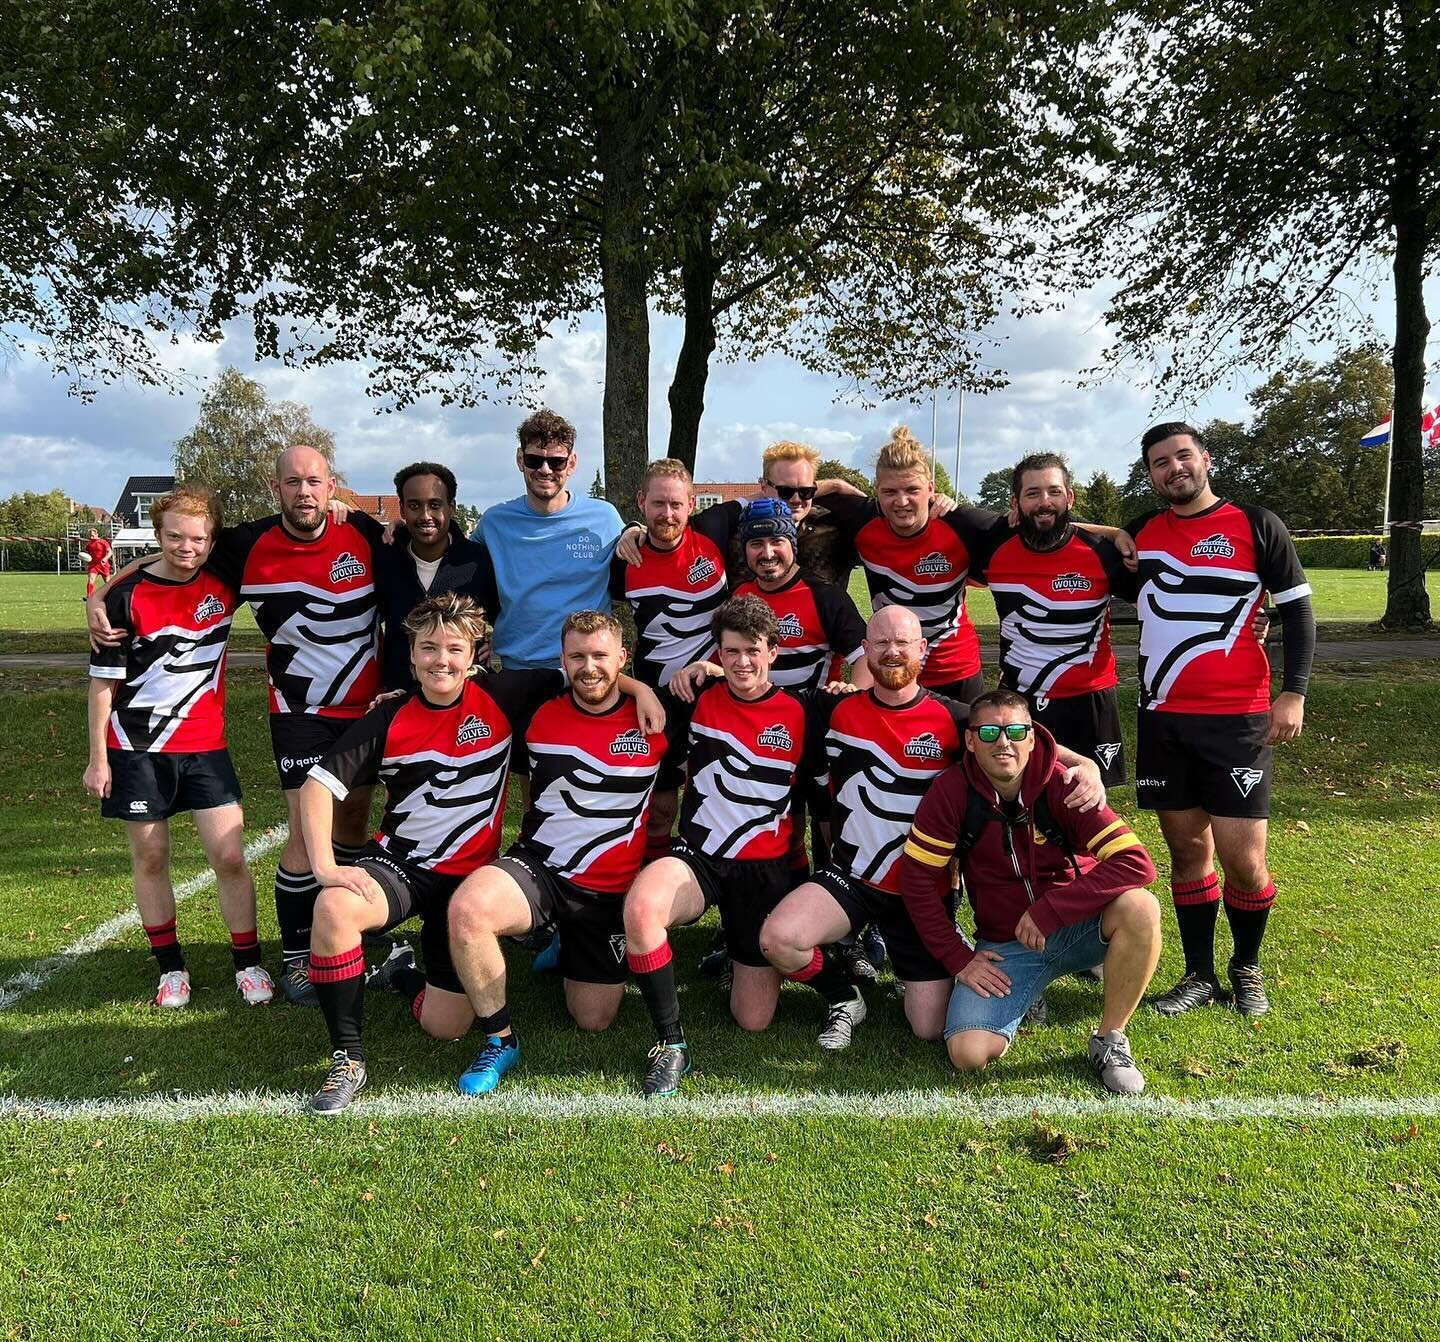 🏉 Saturdays are made for scrums, tries, and unforgettable moments on the rugby field! A massive shoutout to @exiles_rufc for an epic match, and kudos to the Danish Rugby Union @rugbydk for putting it all together. October 7th in Frederiksberg can&rs